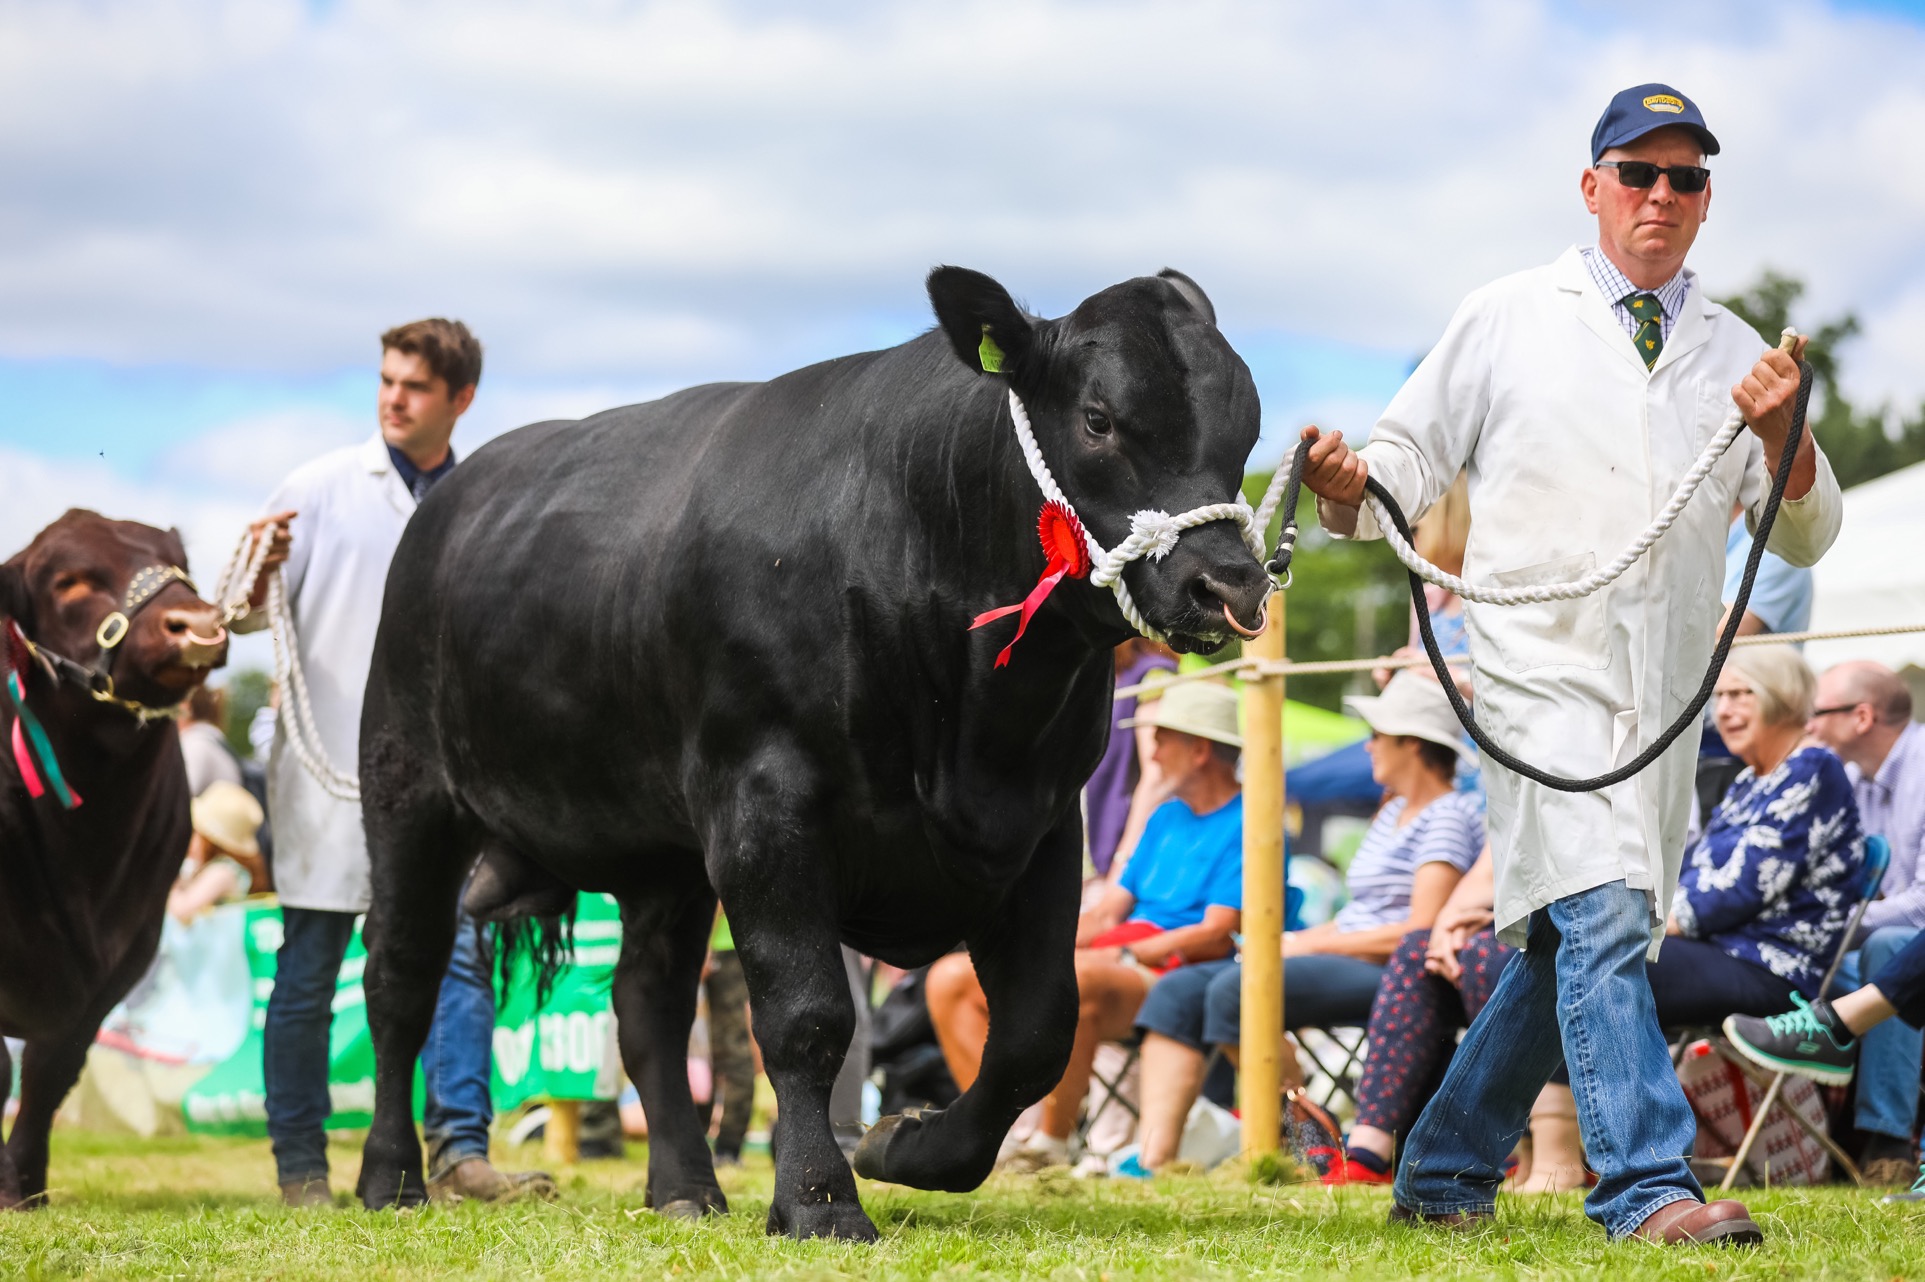 Winners on the move - the Livestock Grand Parade 2019